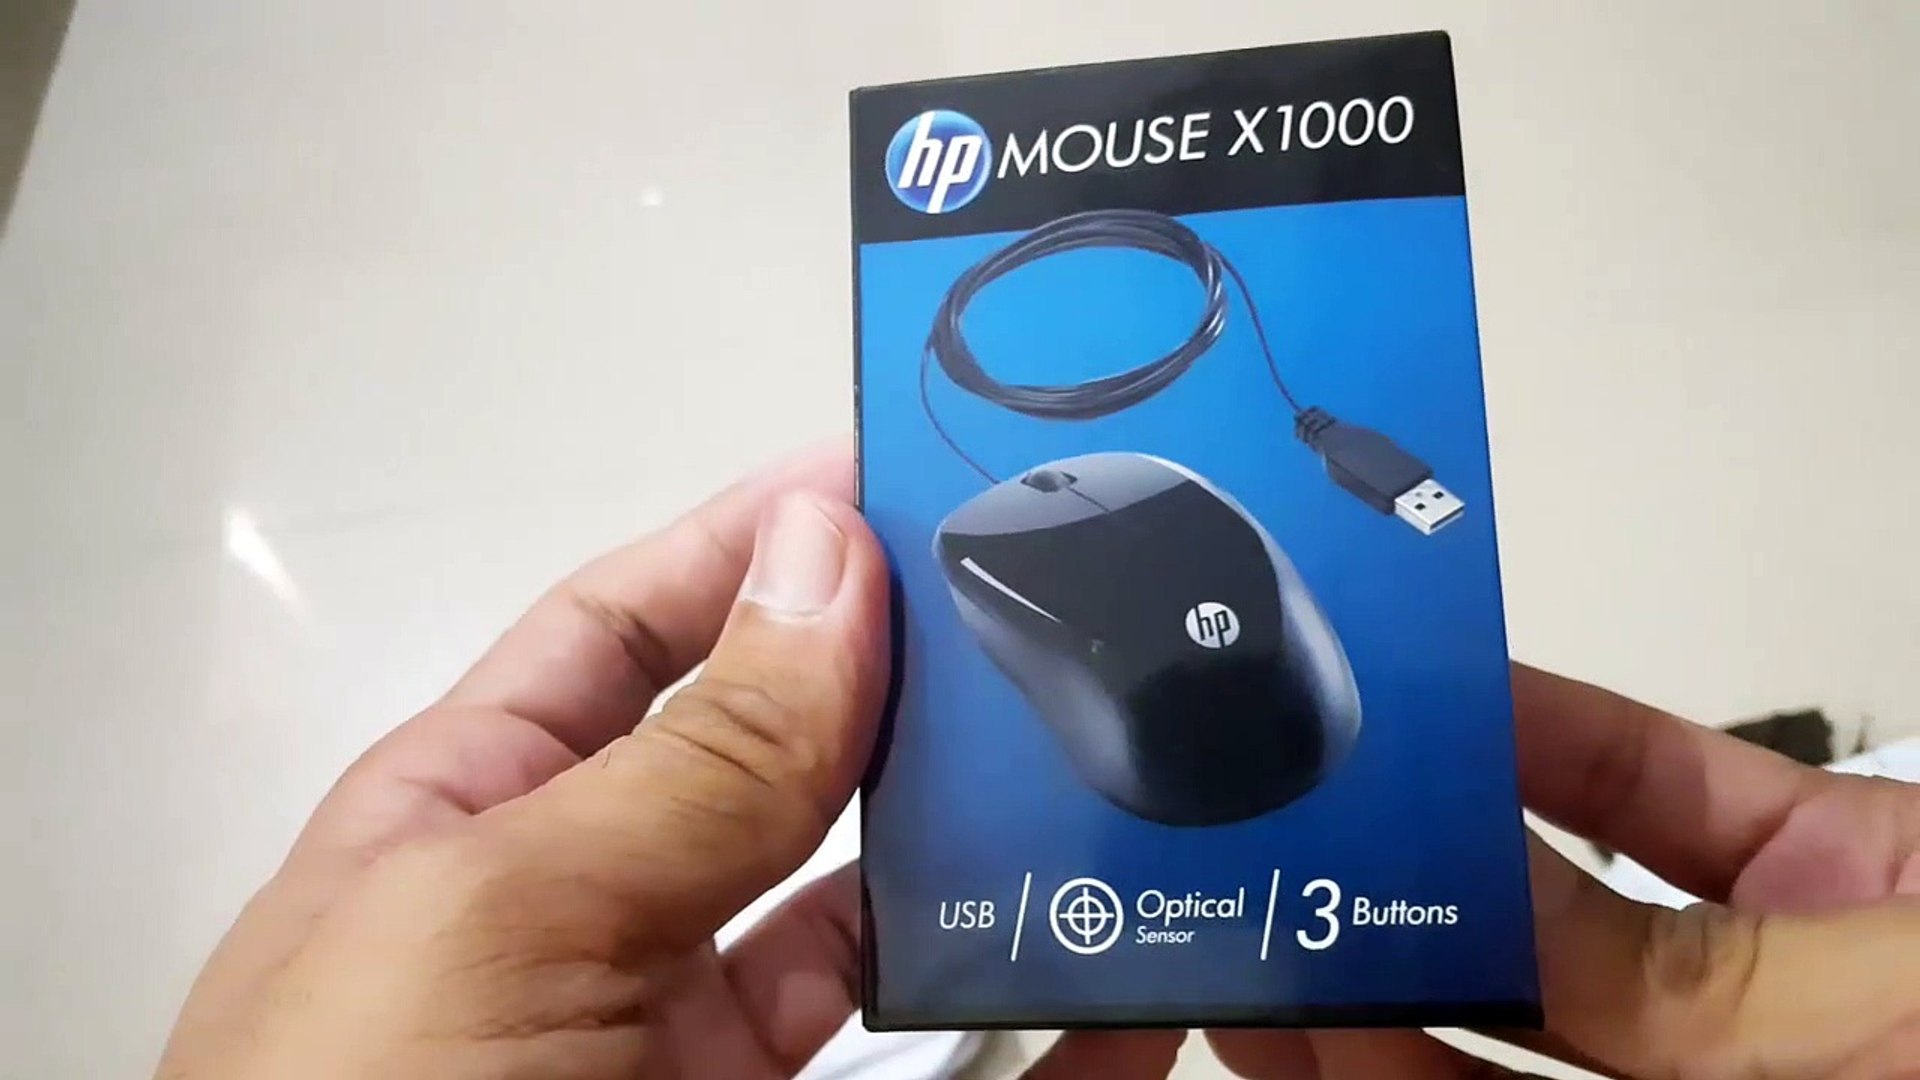 unboxing of budget HP X1000 Wired Optical mouse - video Dailymotion